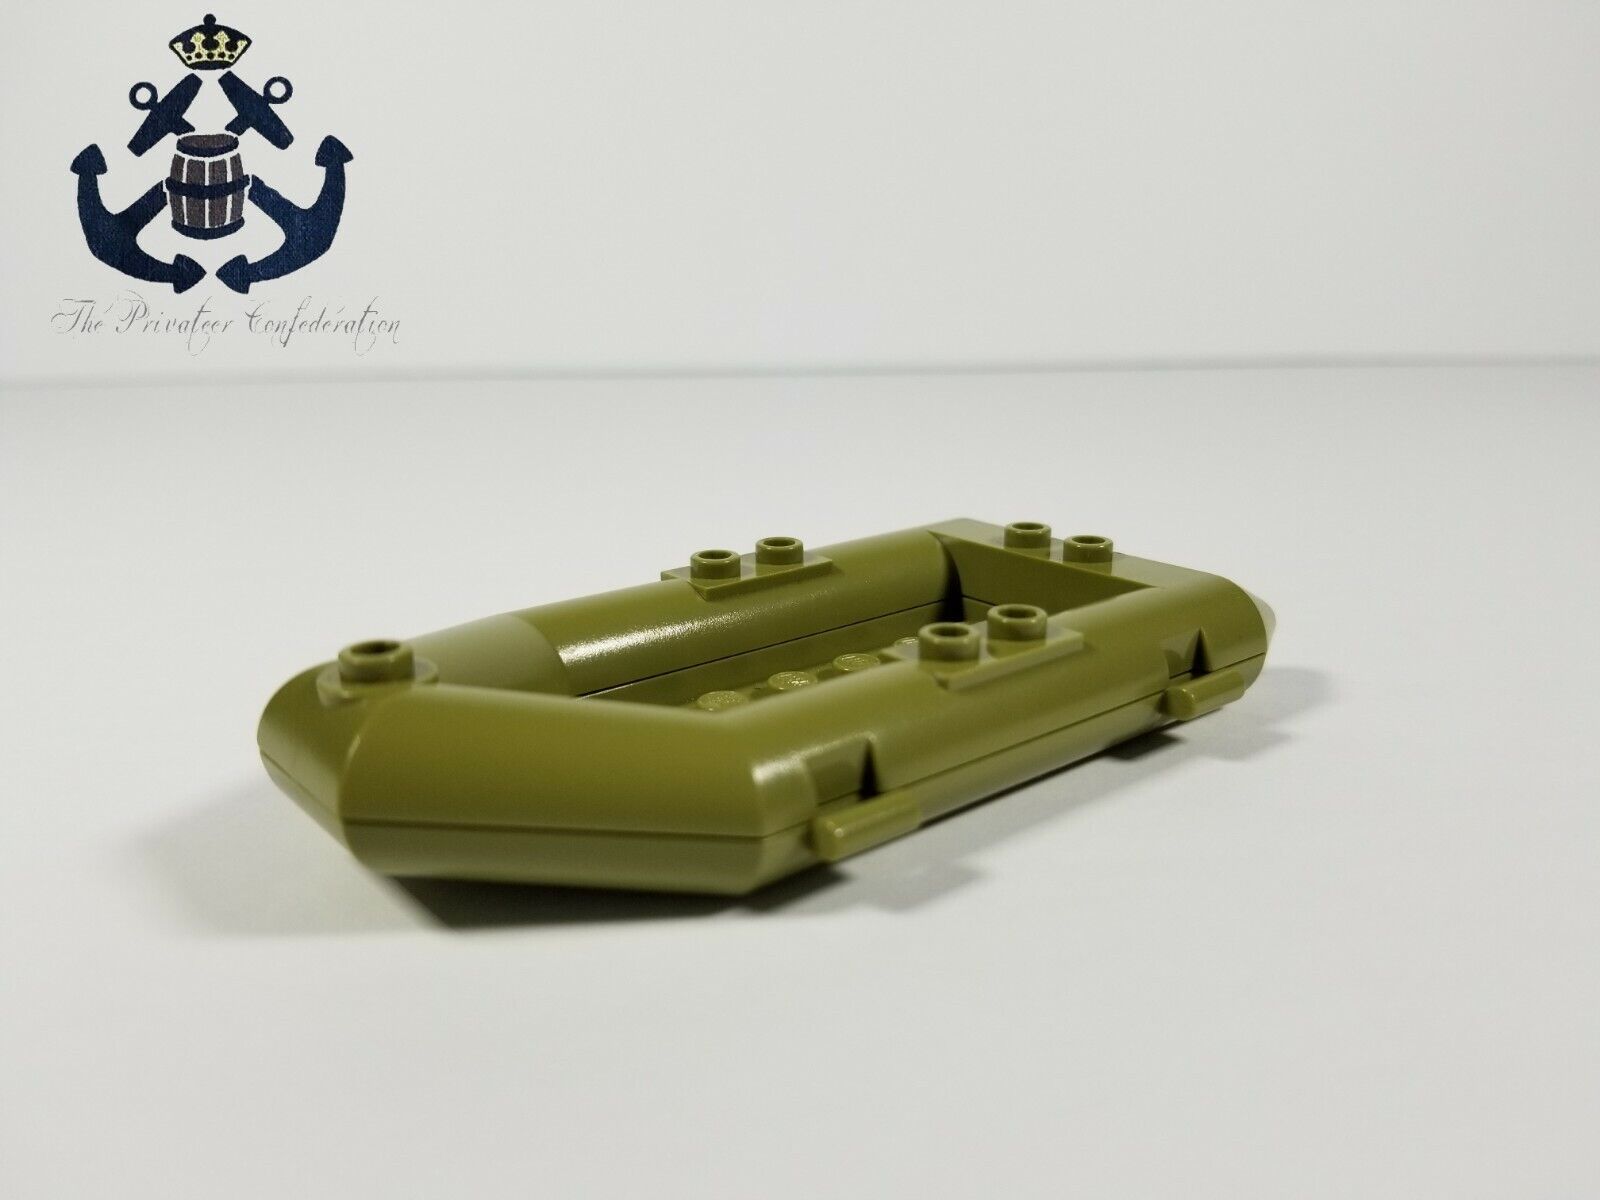 Lego City / Town Olive Green Boat Rubber Raft, Small 30086 - Police, Coast Guard